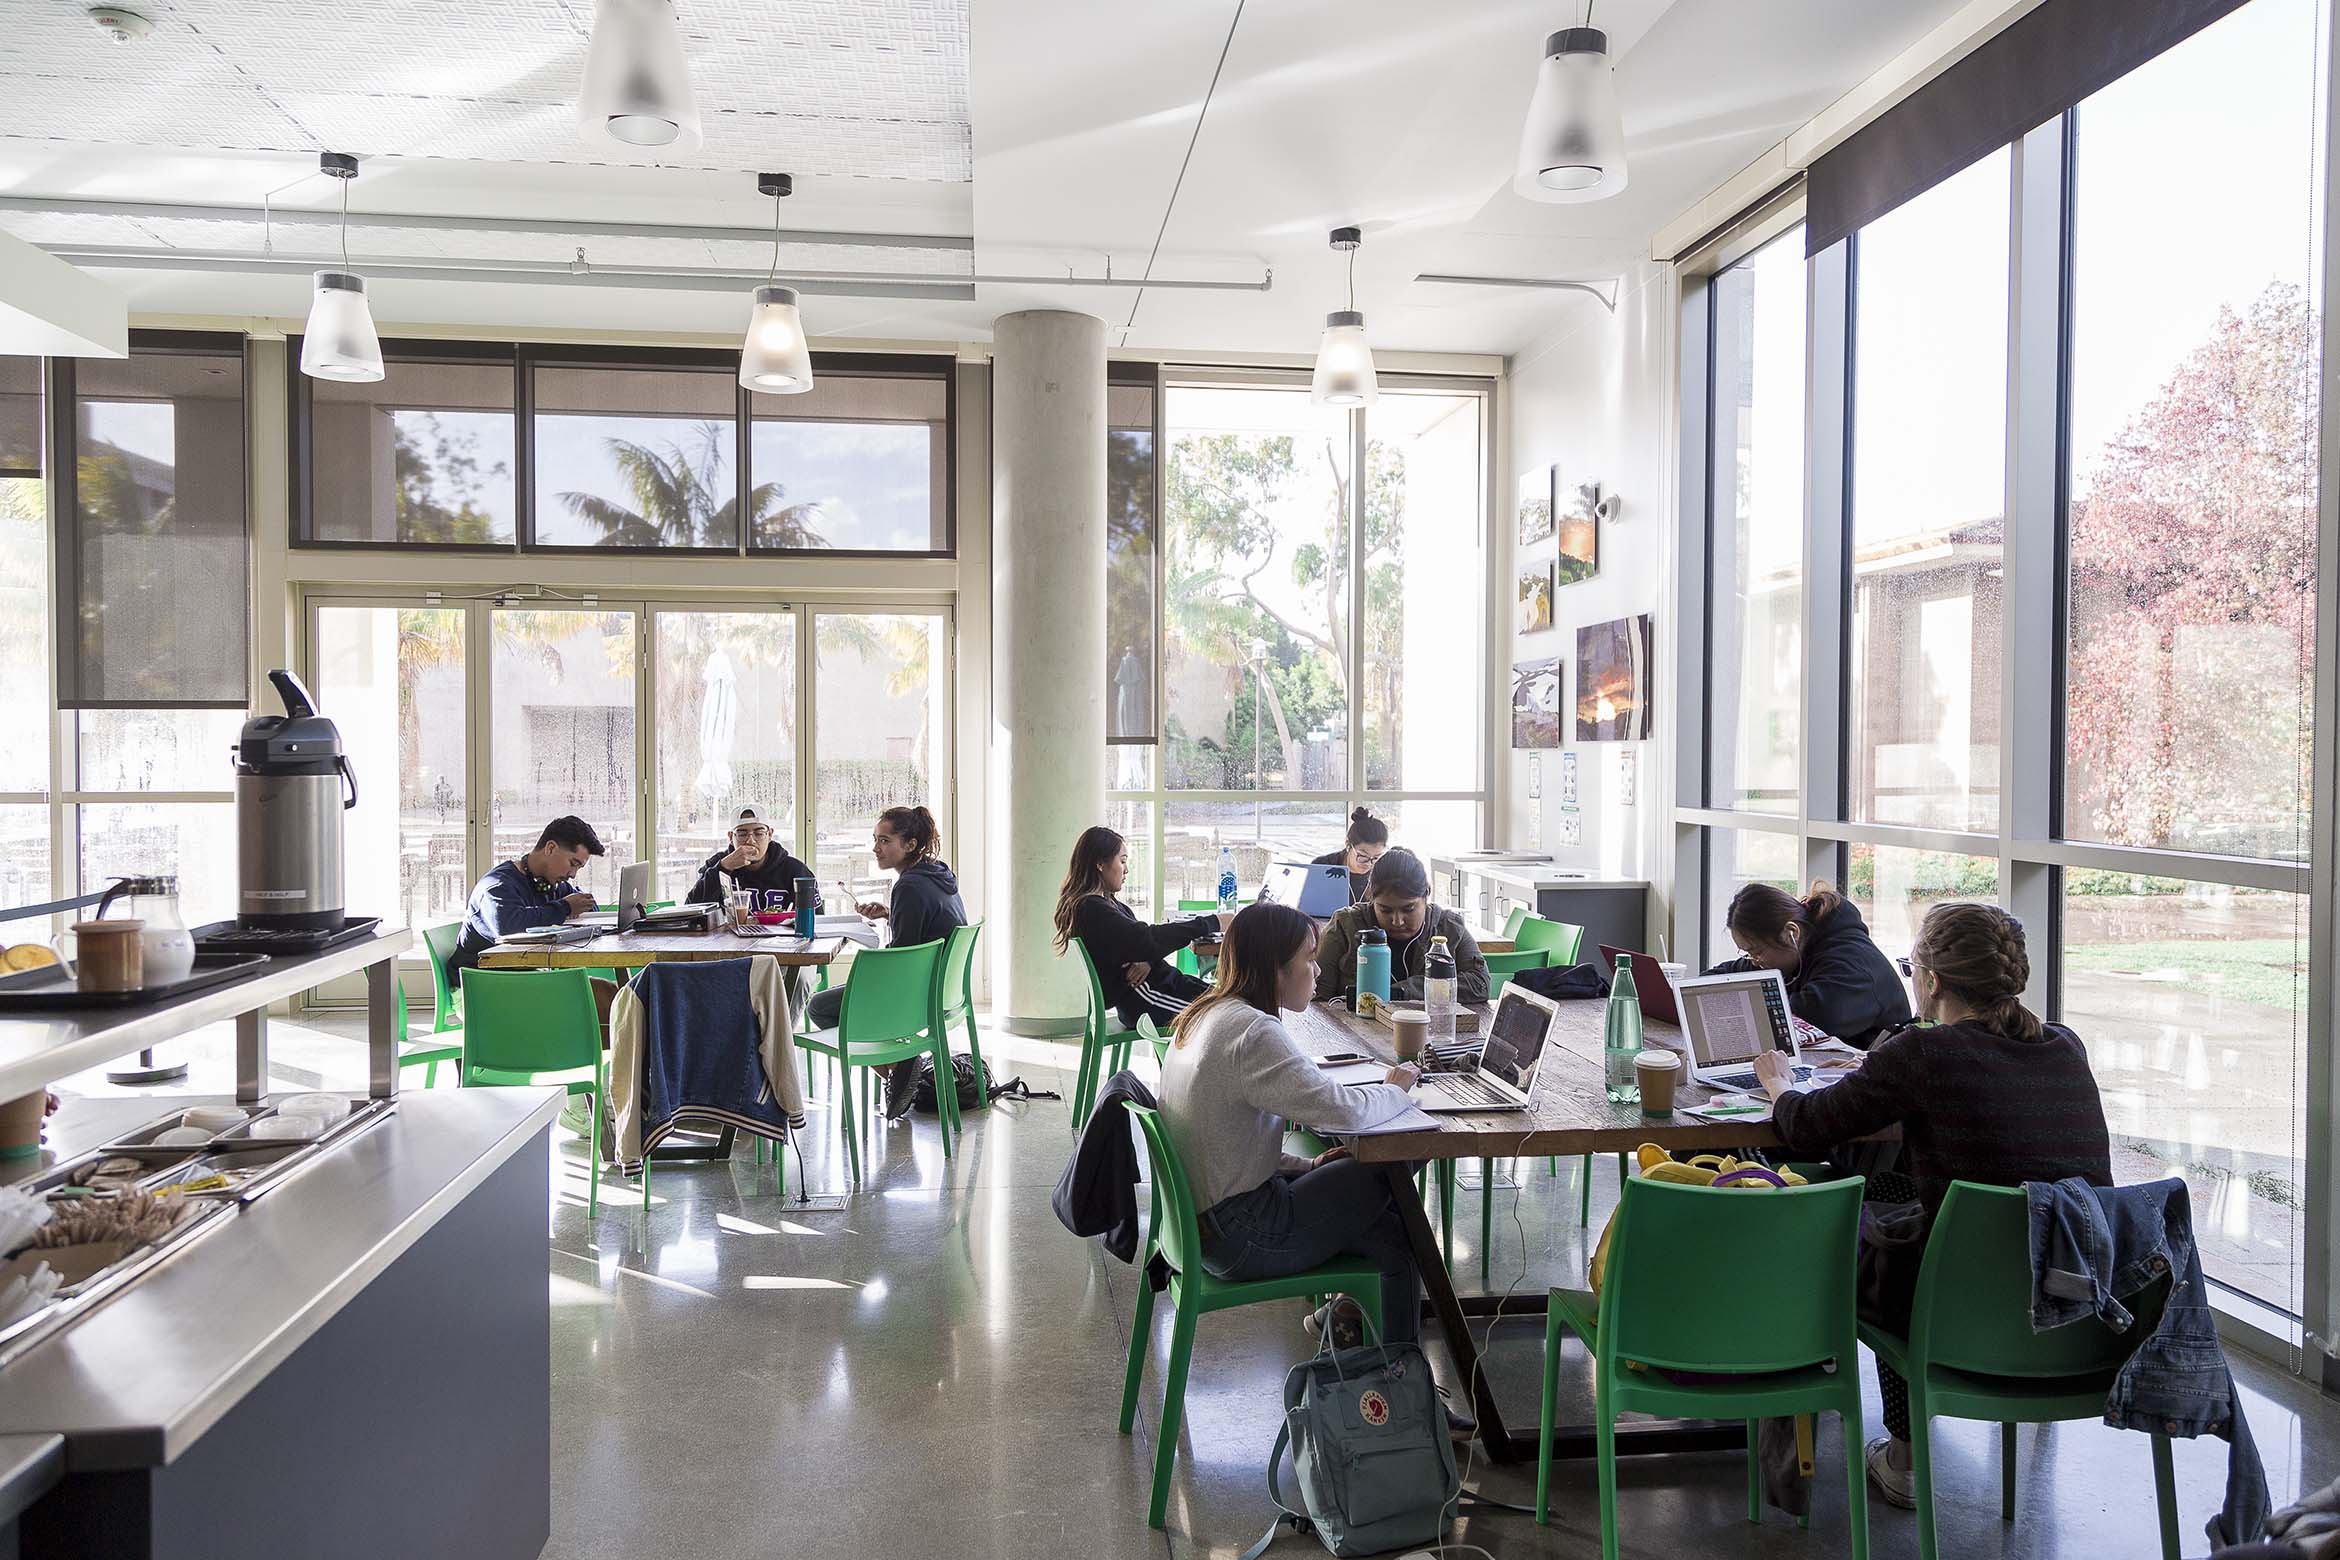 Students studying at Summit Cafe on campus